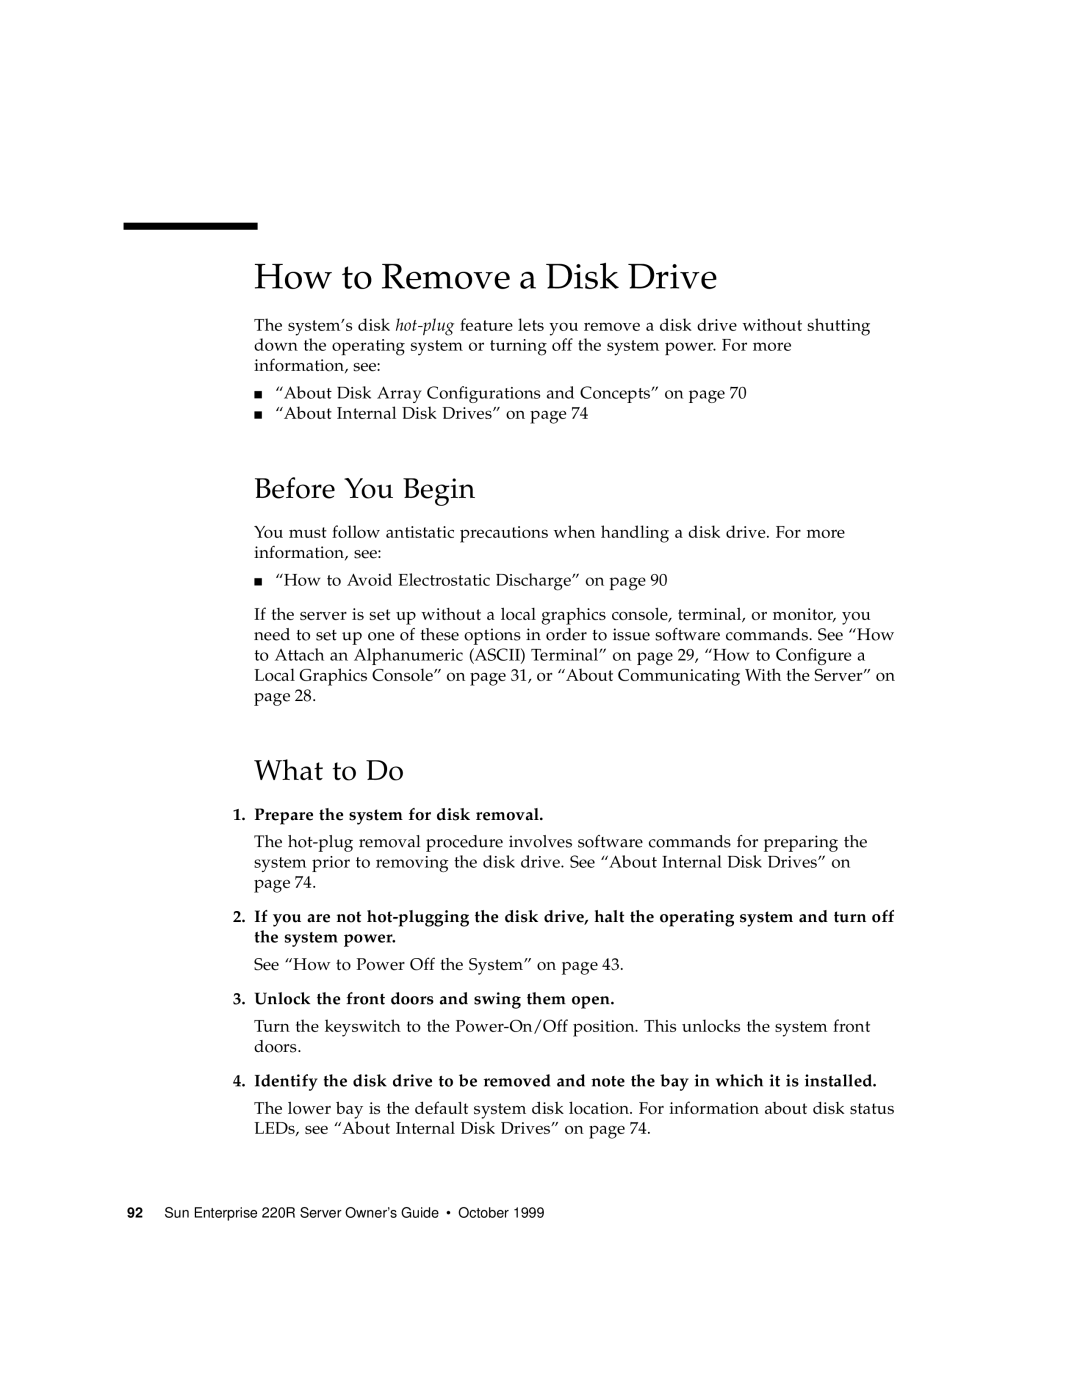 Sun Microsystems 220R manual How to Remove a Disk Drive, Prepare the system for disk removal, Before You Begin, What to Do 